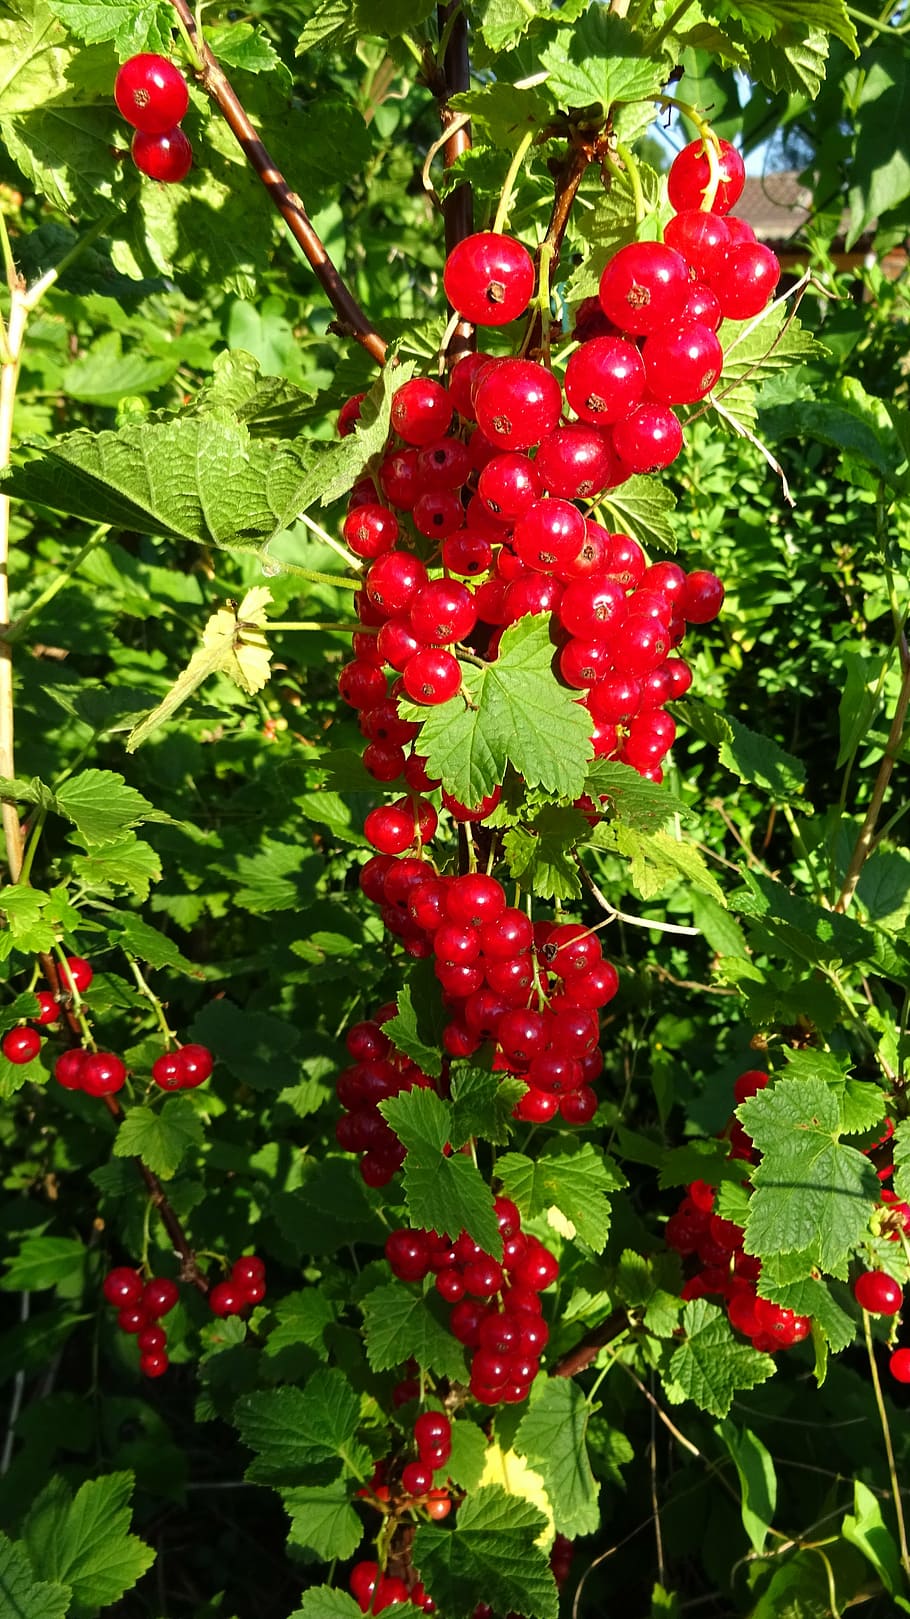 currants, red currant, red, gooseberry greenhouse, bush, ribes, blood currant, ribes aureum, branch, ornamental shrub